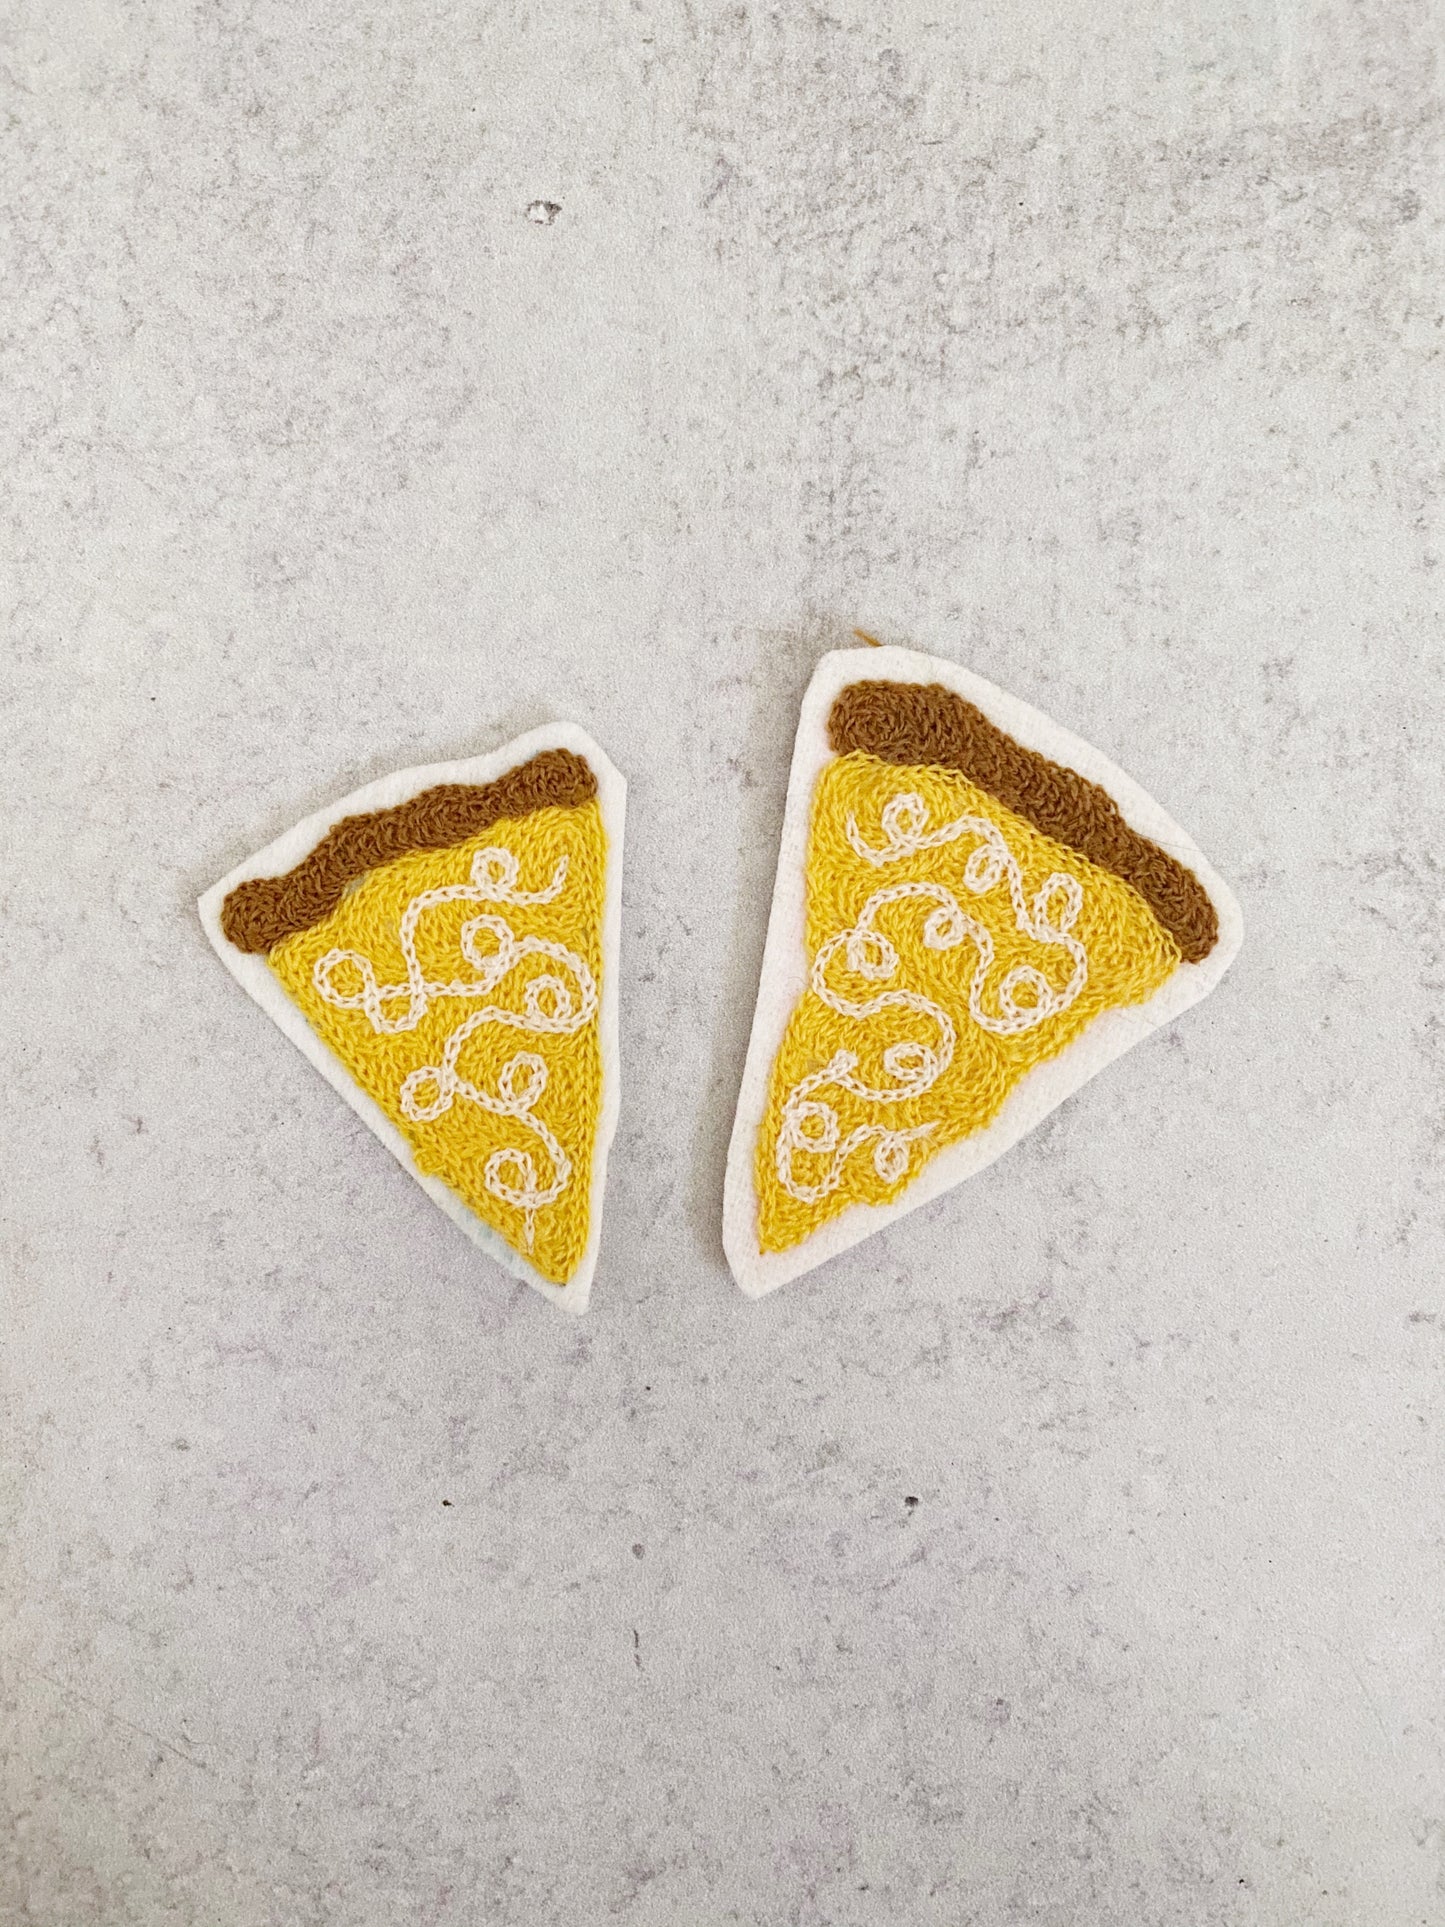 Pepperoni Pizza Patch Set of 2